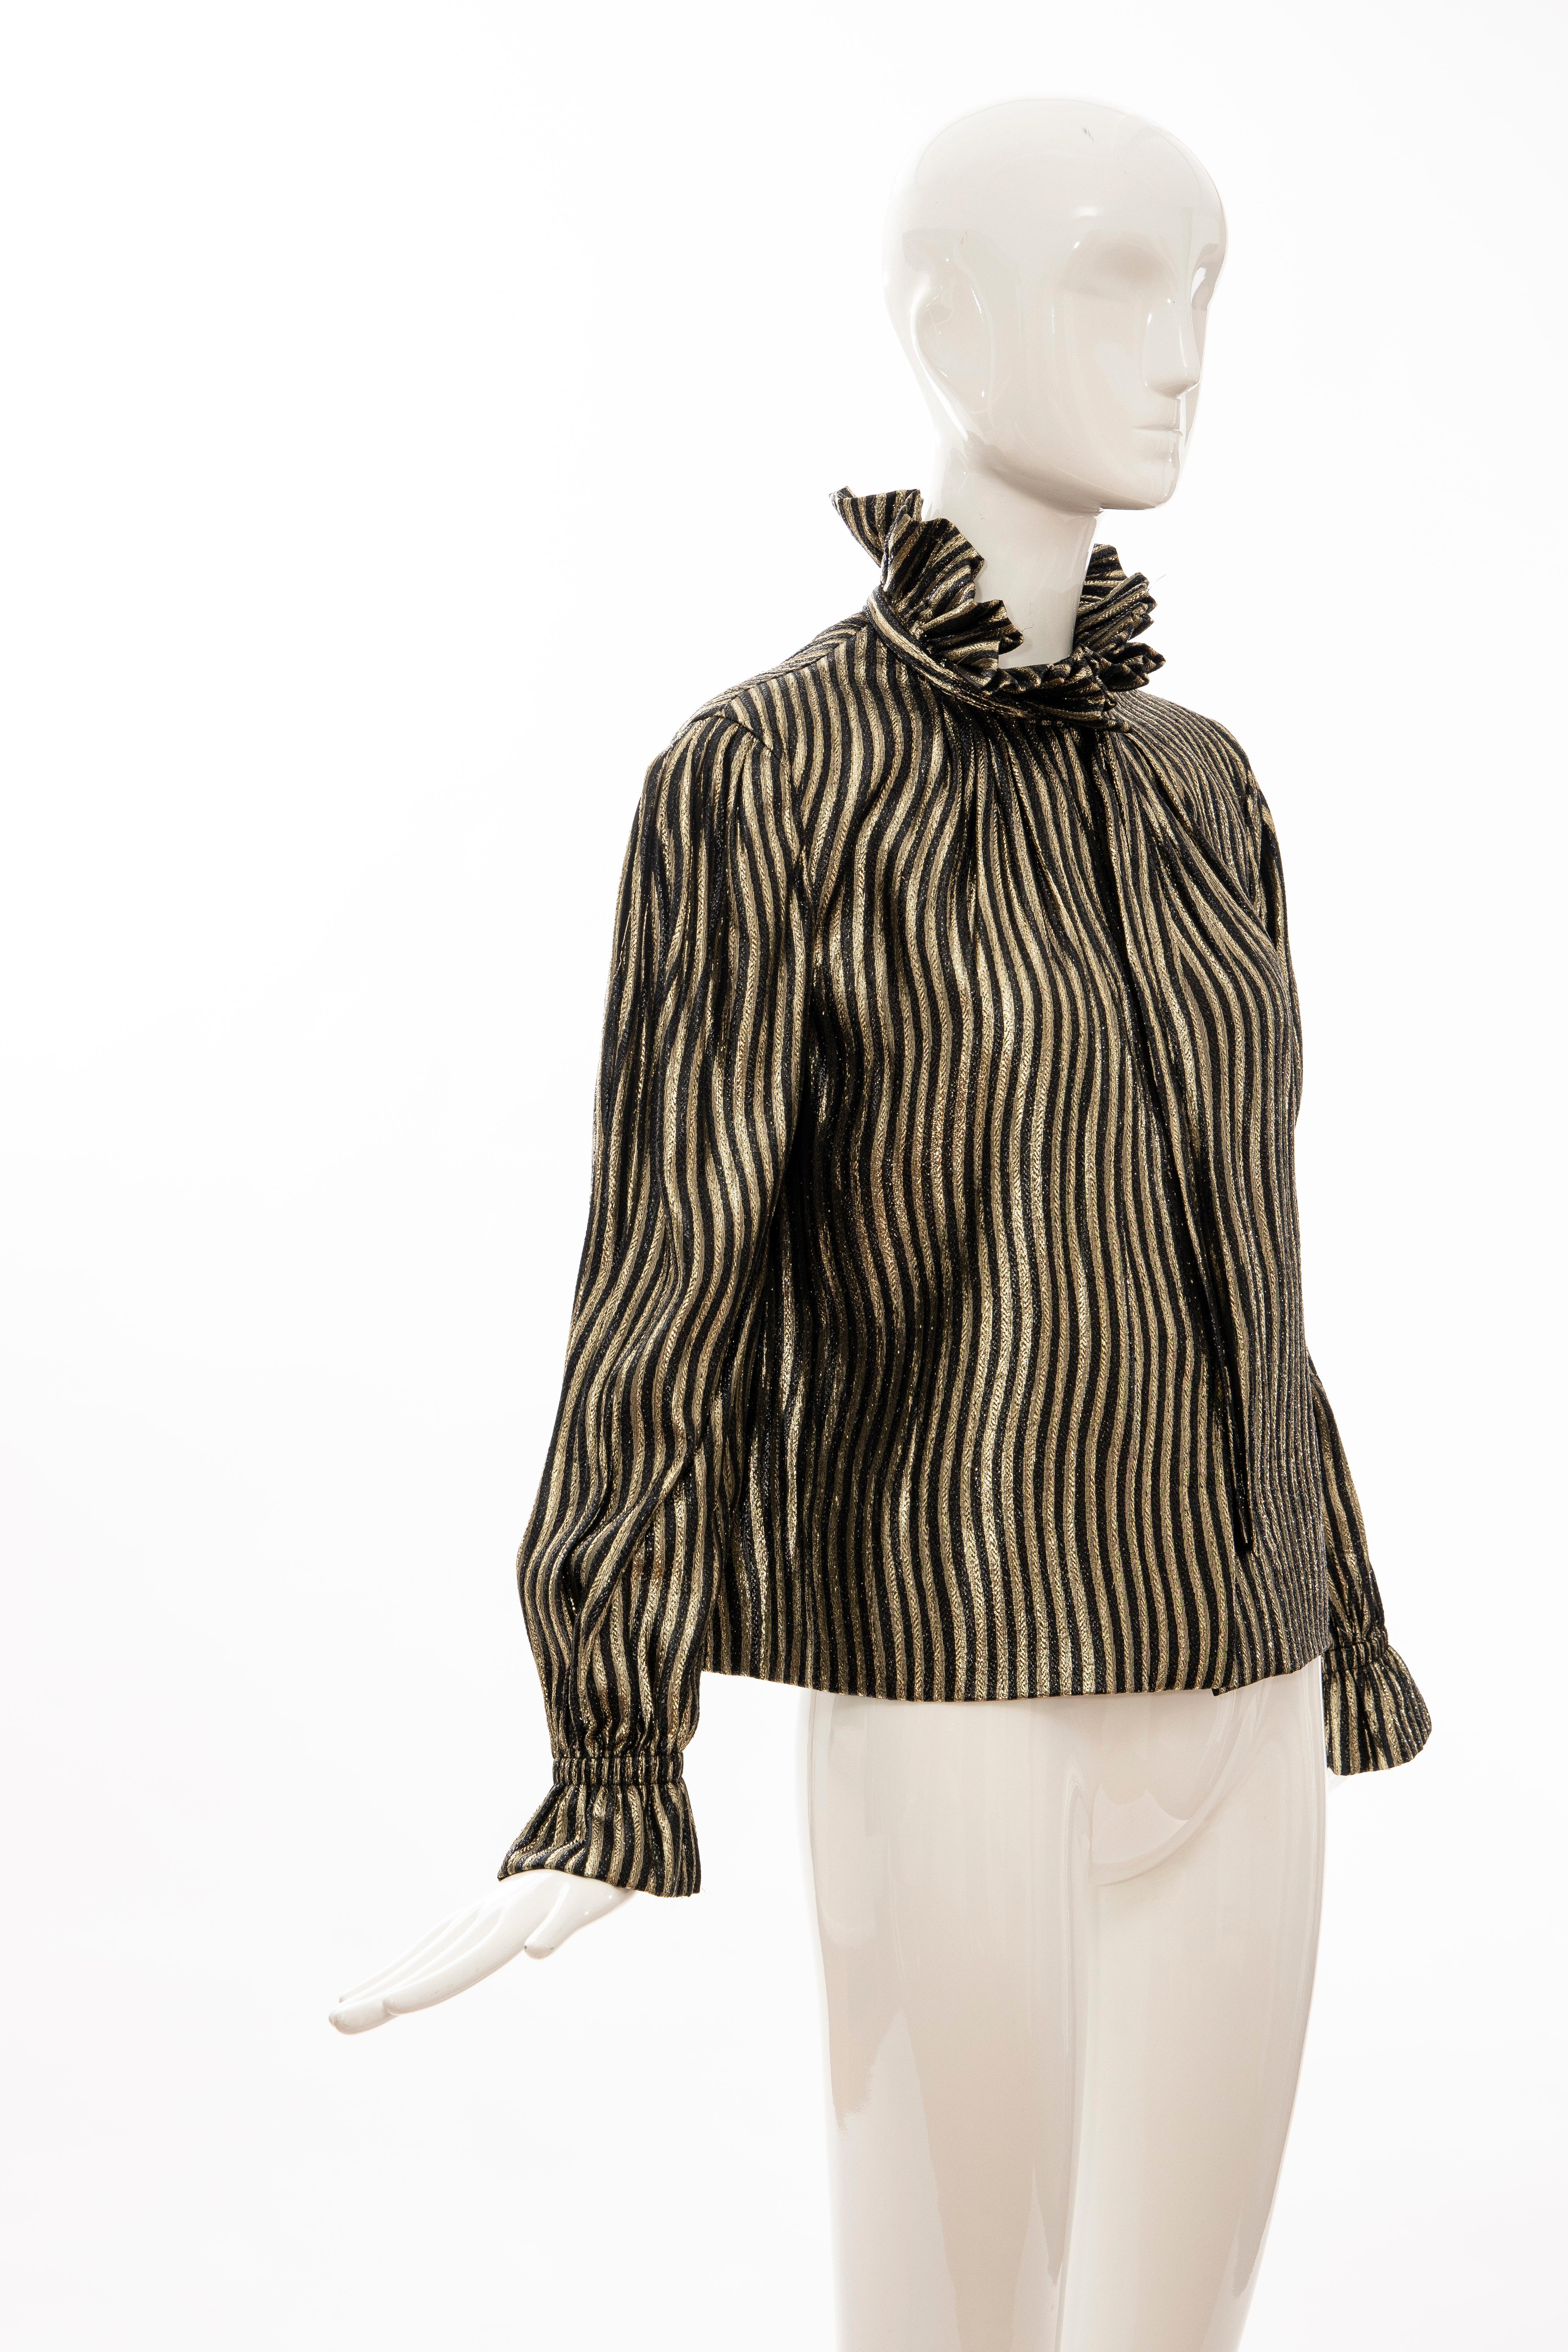 Pauline Trigere Black Gold Striped Metallic Snap Front Blouse, Circa: 1970's For Sale 2